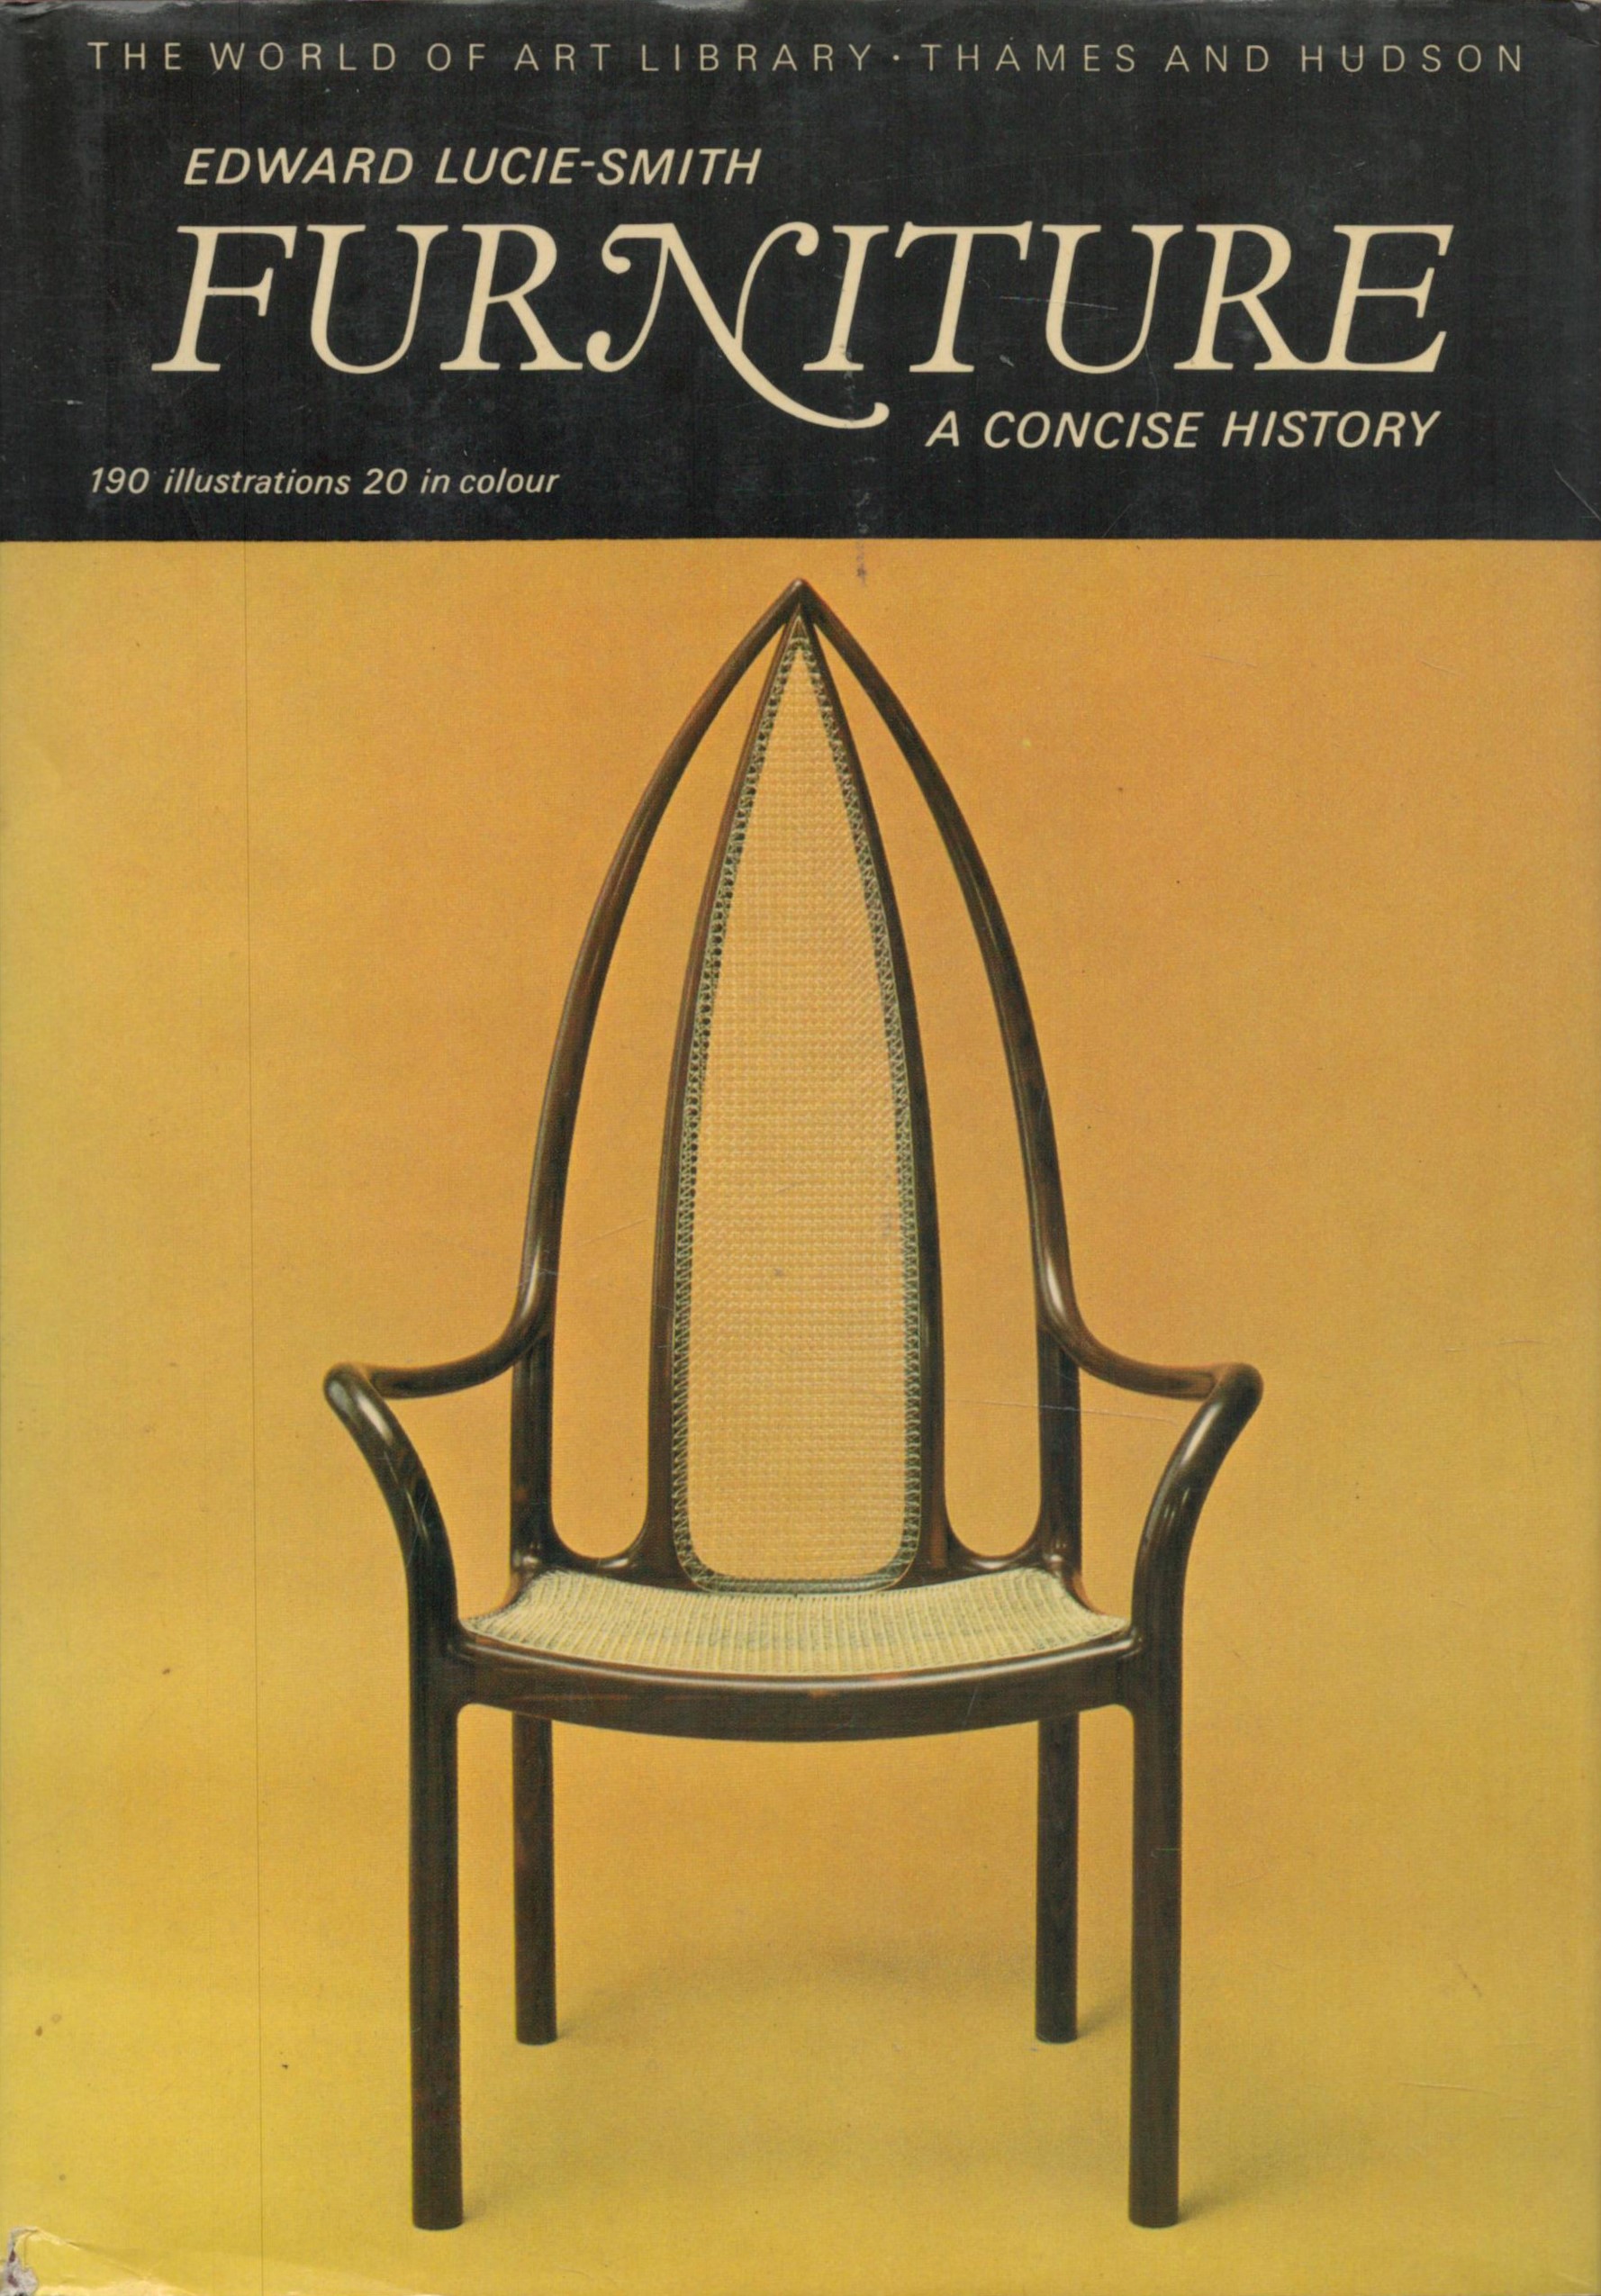 Furniture A Concise History by Edward Lucie Smith 1979 First Edition Hardback Book with 216 pages